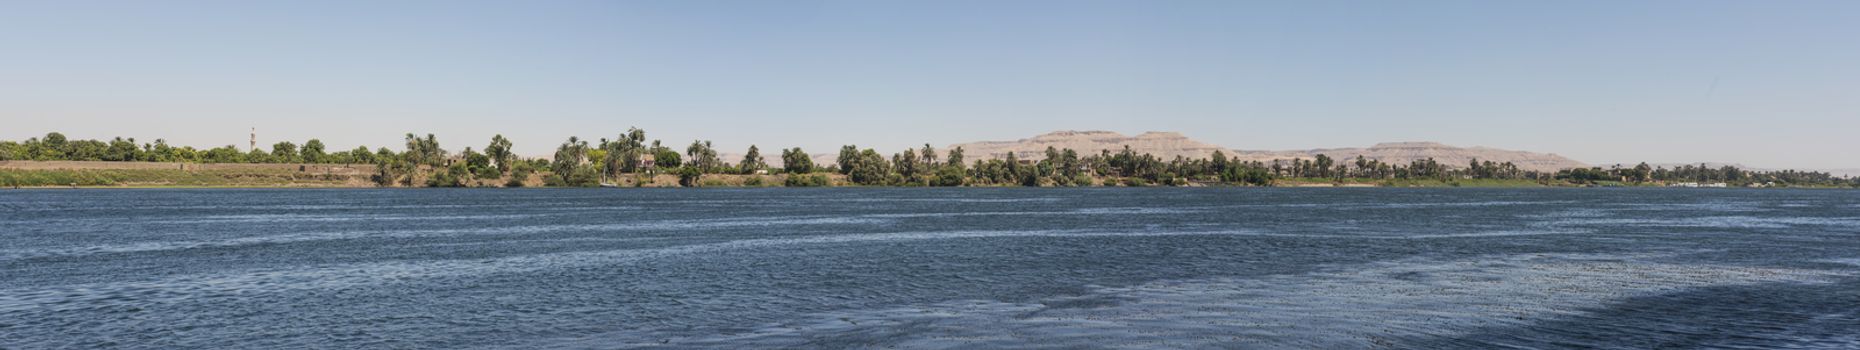 Panoramic landscape rural countryside view of large river nile in arid environment showing luxor west bank